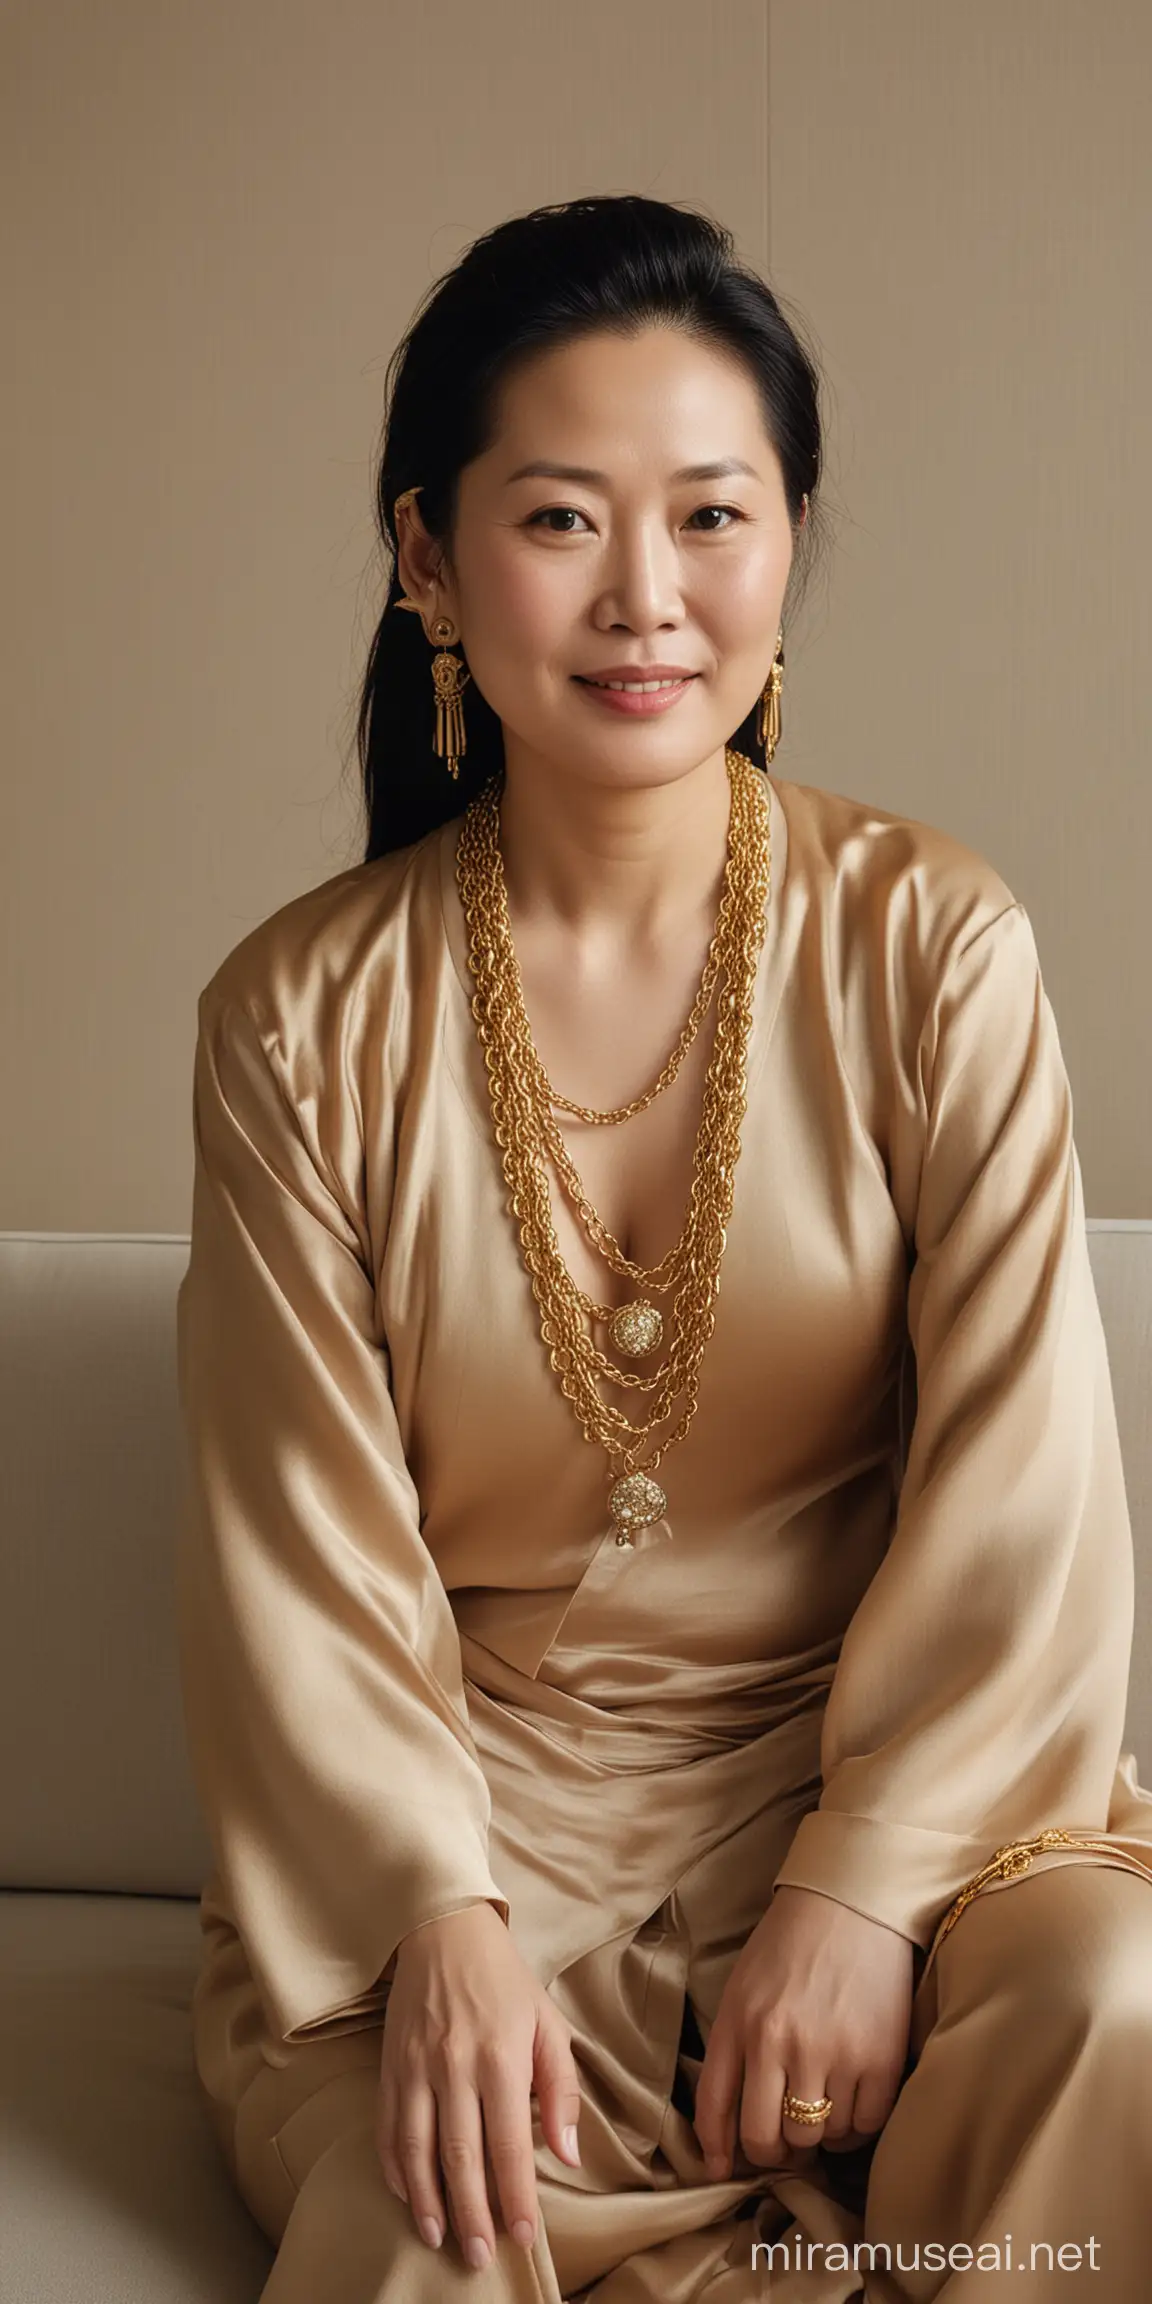 Elegant Chinese Matron in Luxurious Living Room